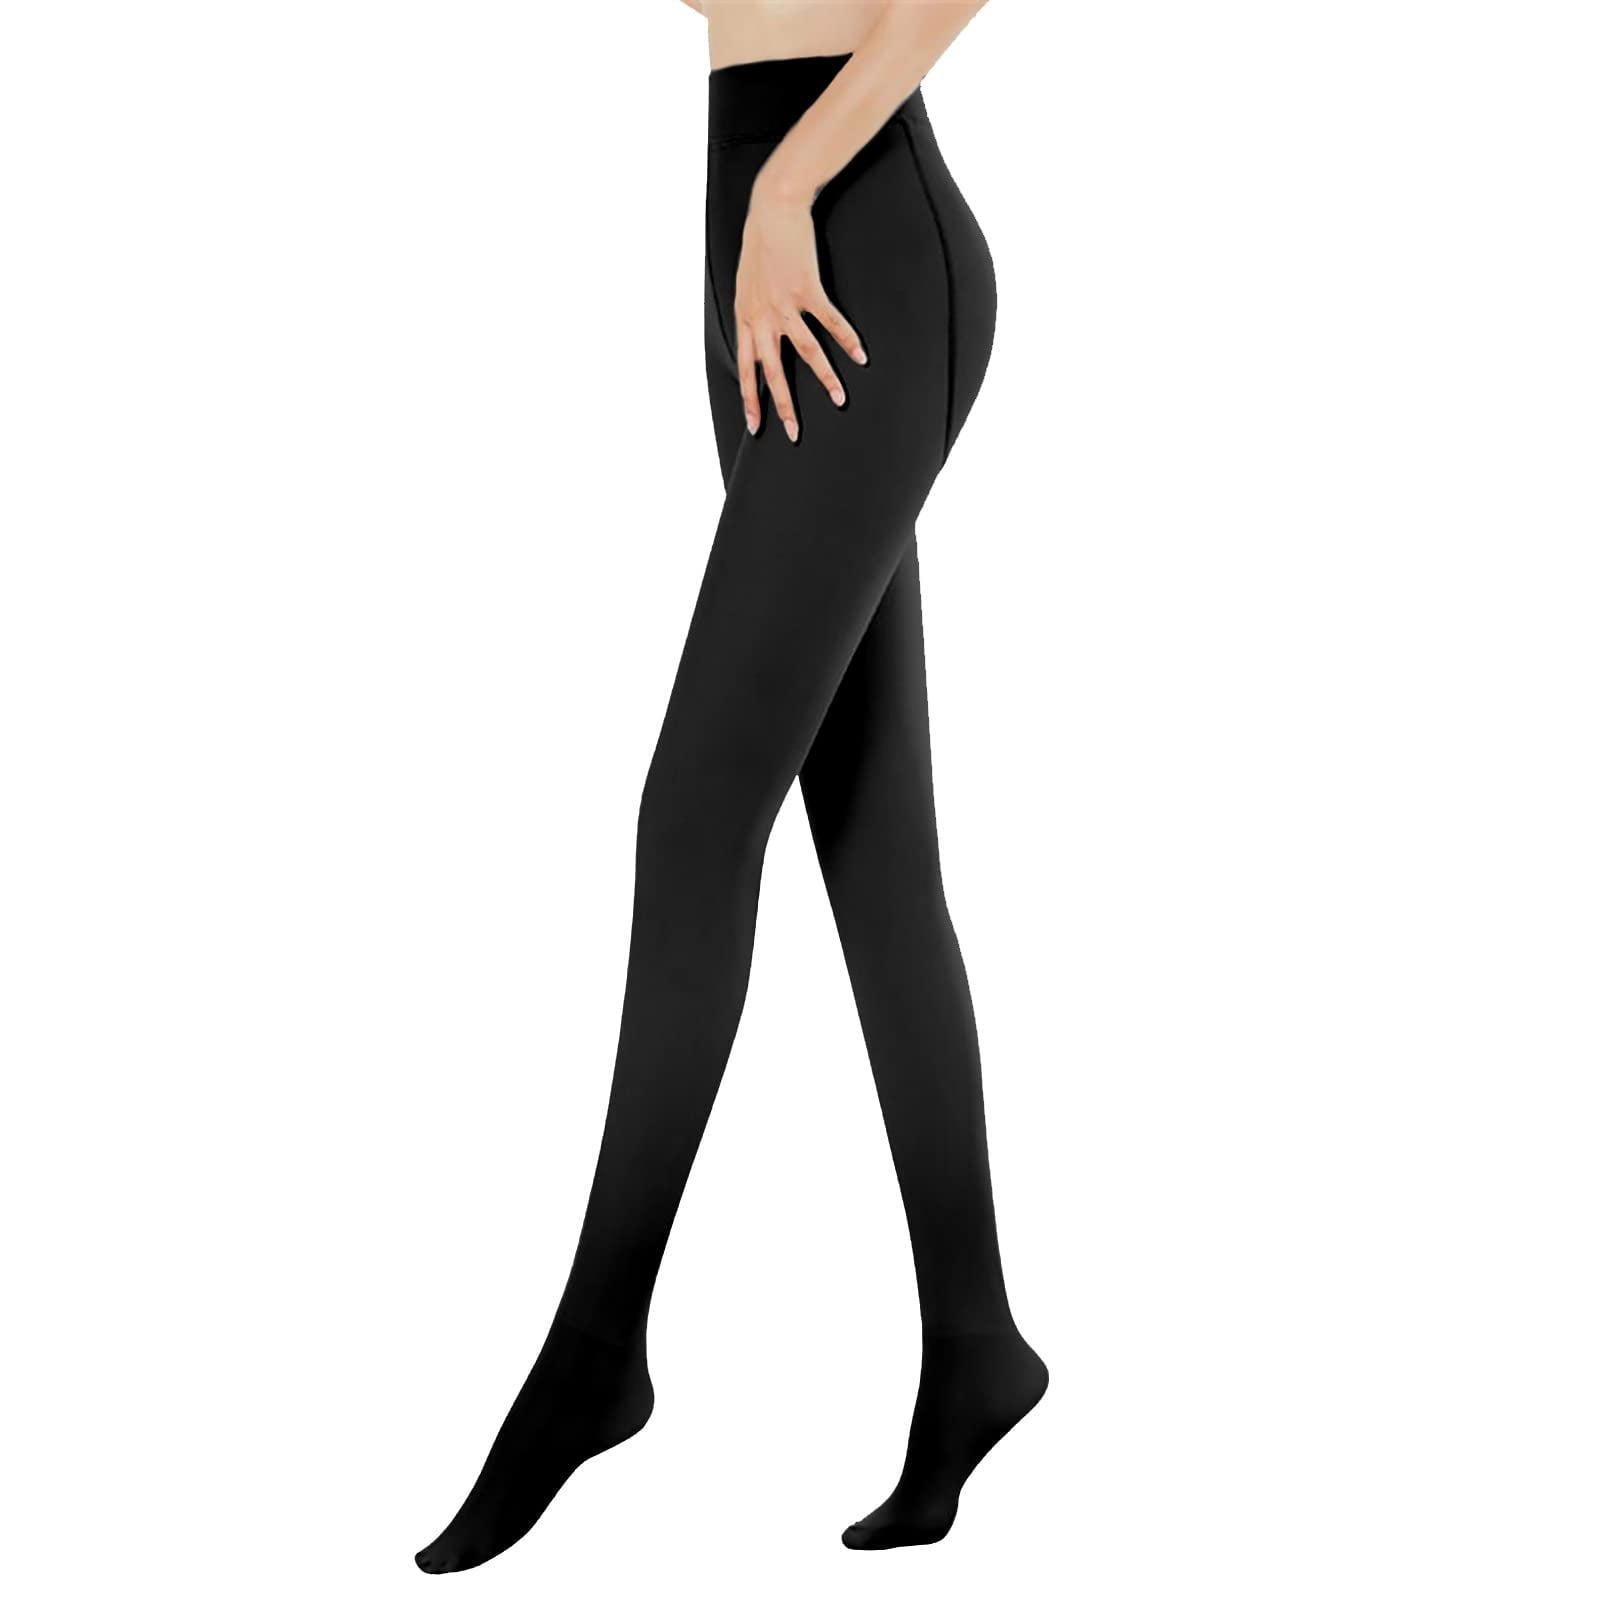 Fleece Lined Tights Women Sheer Fake Translucent Tights Faux Translucent  Winter Thermal Warm High Waisted Leggings 